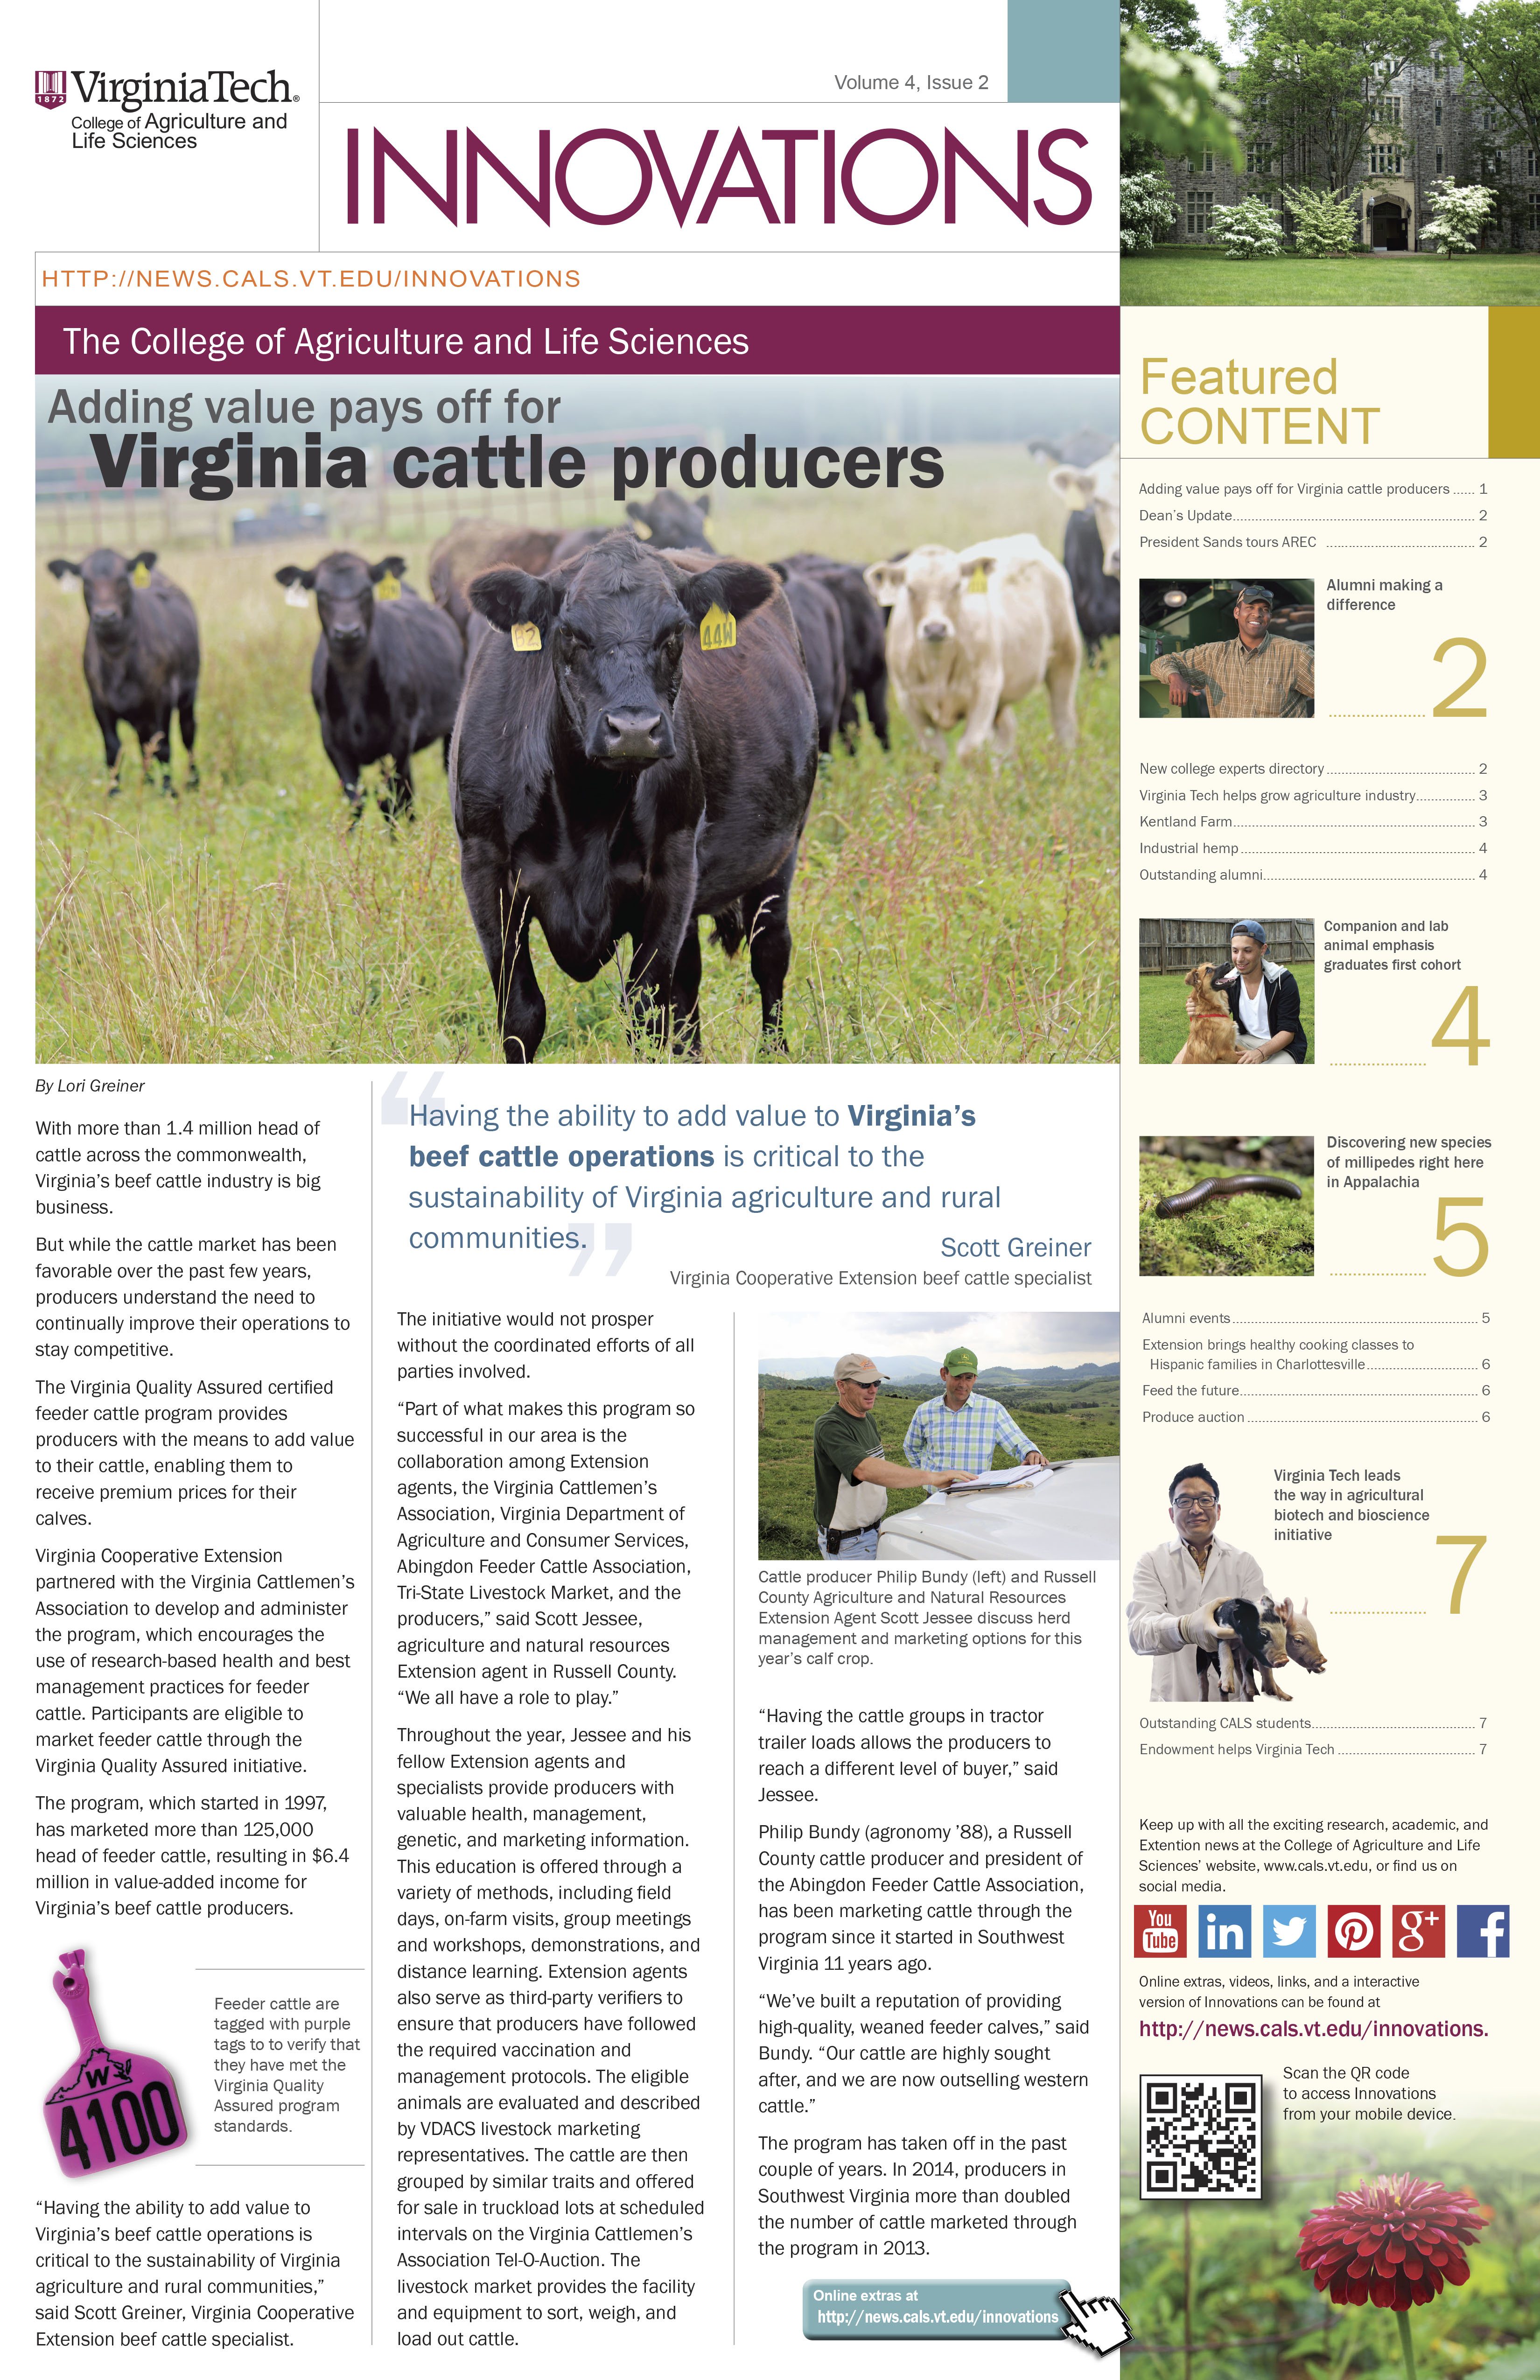 Innovations is published three times a year by the College of Agriculture and Life Sciences.